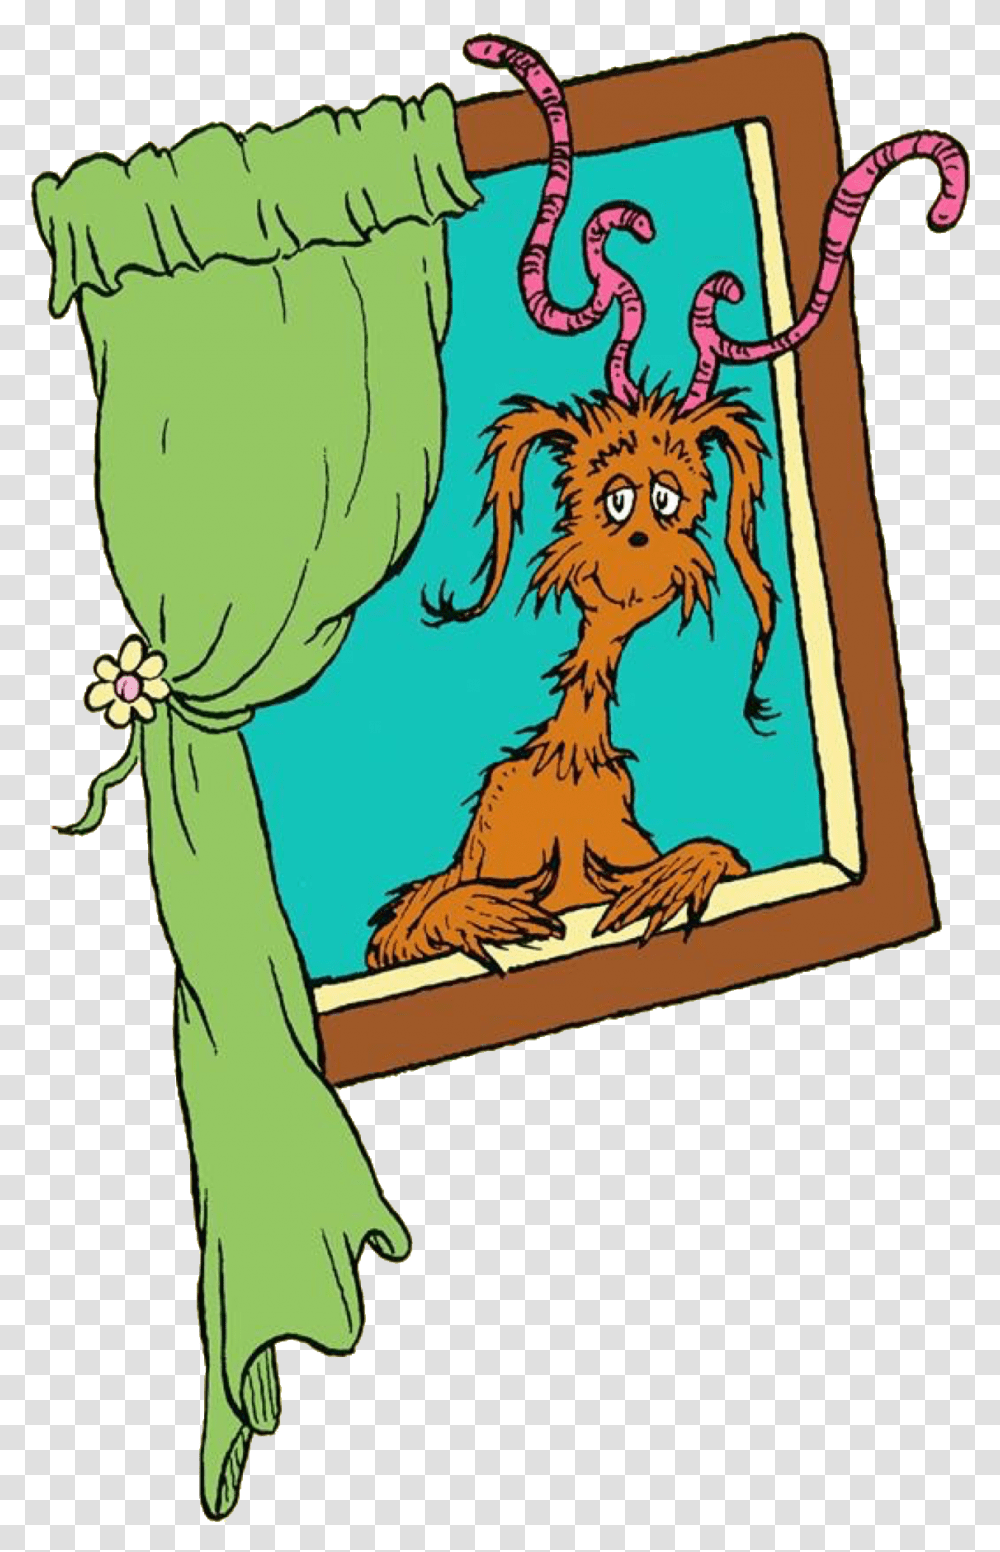 Seuss Wiki Character There's A Wocket In My Pocket, Plant, Flower, Animal Transparent Png